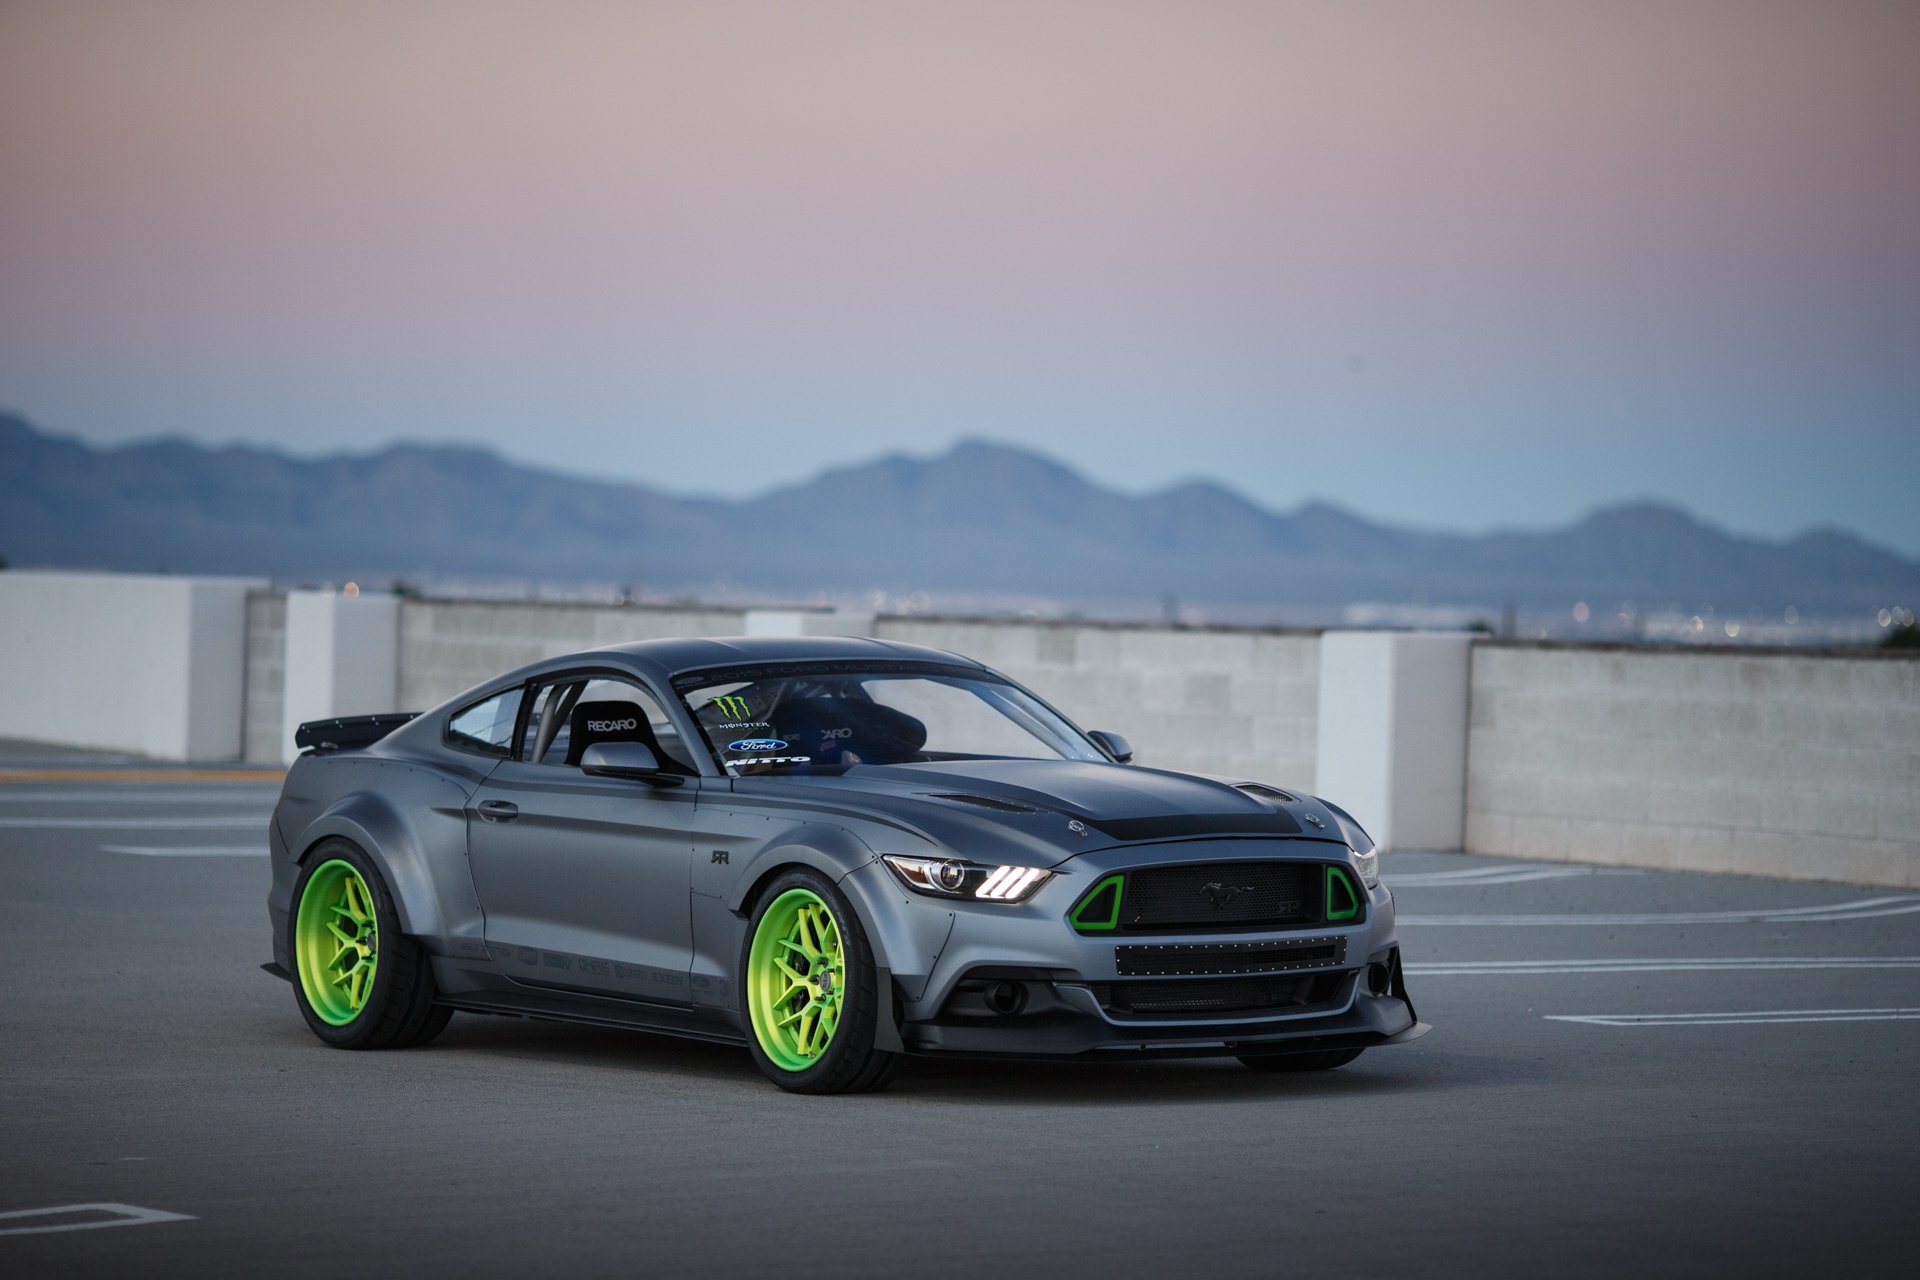 2015, Ford, Mustang, Rtr, Muscle, Tuning, Hot, Rod, Rods, Drift, Race, Racing Wallpaper